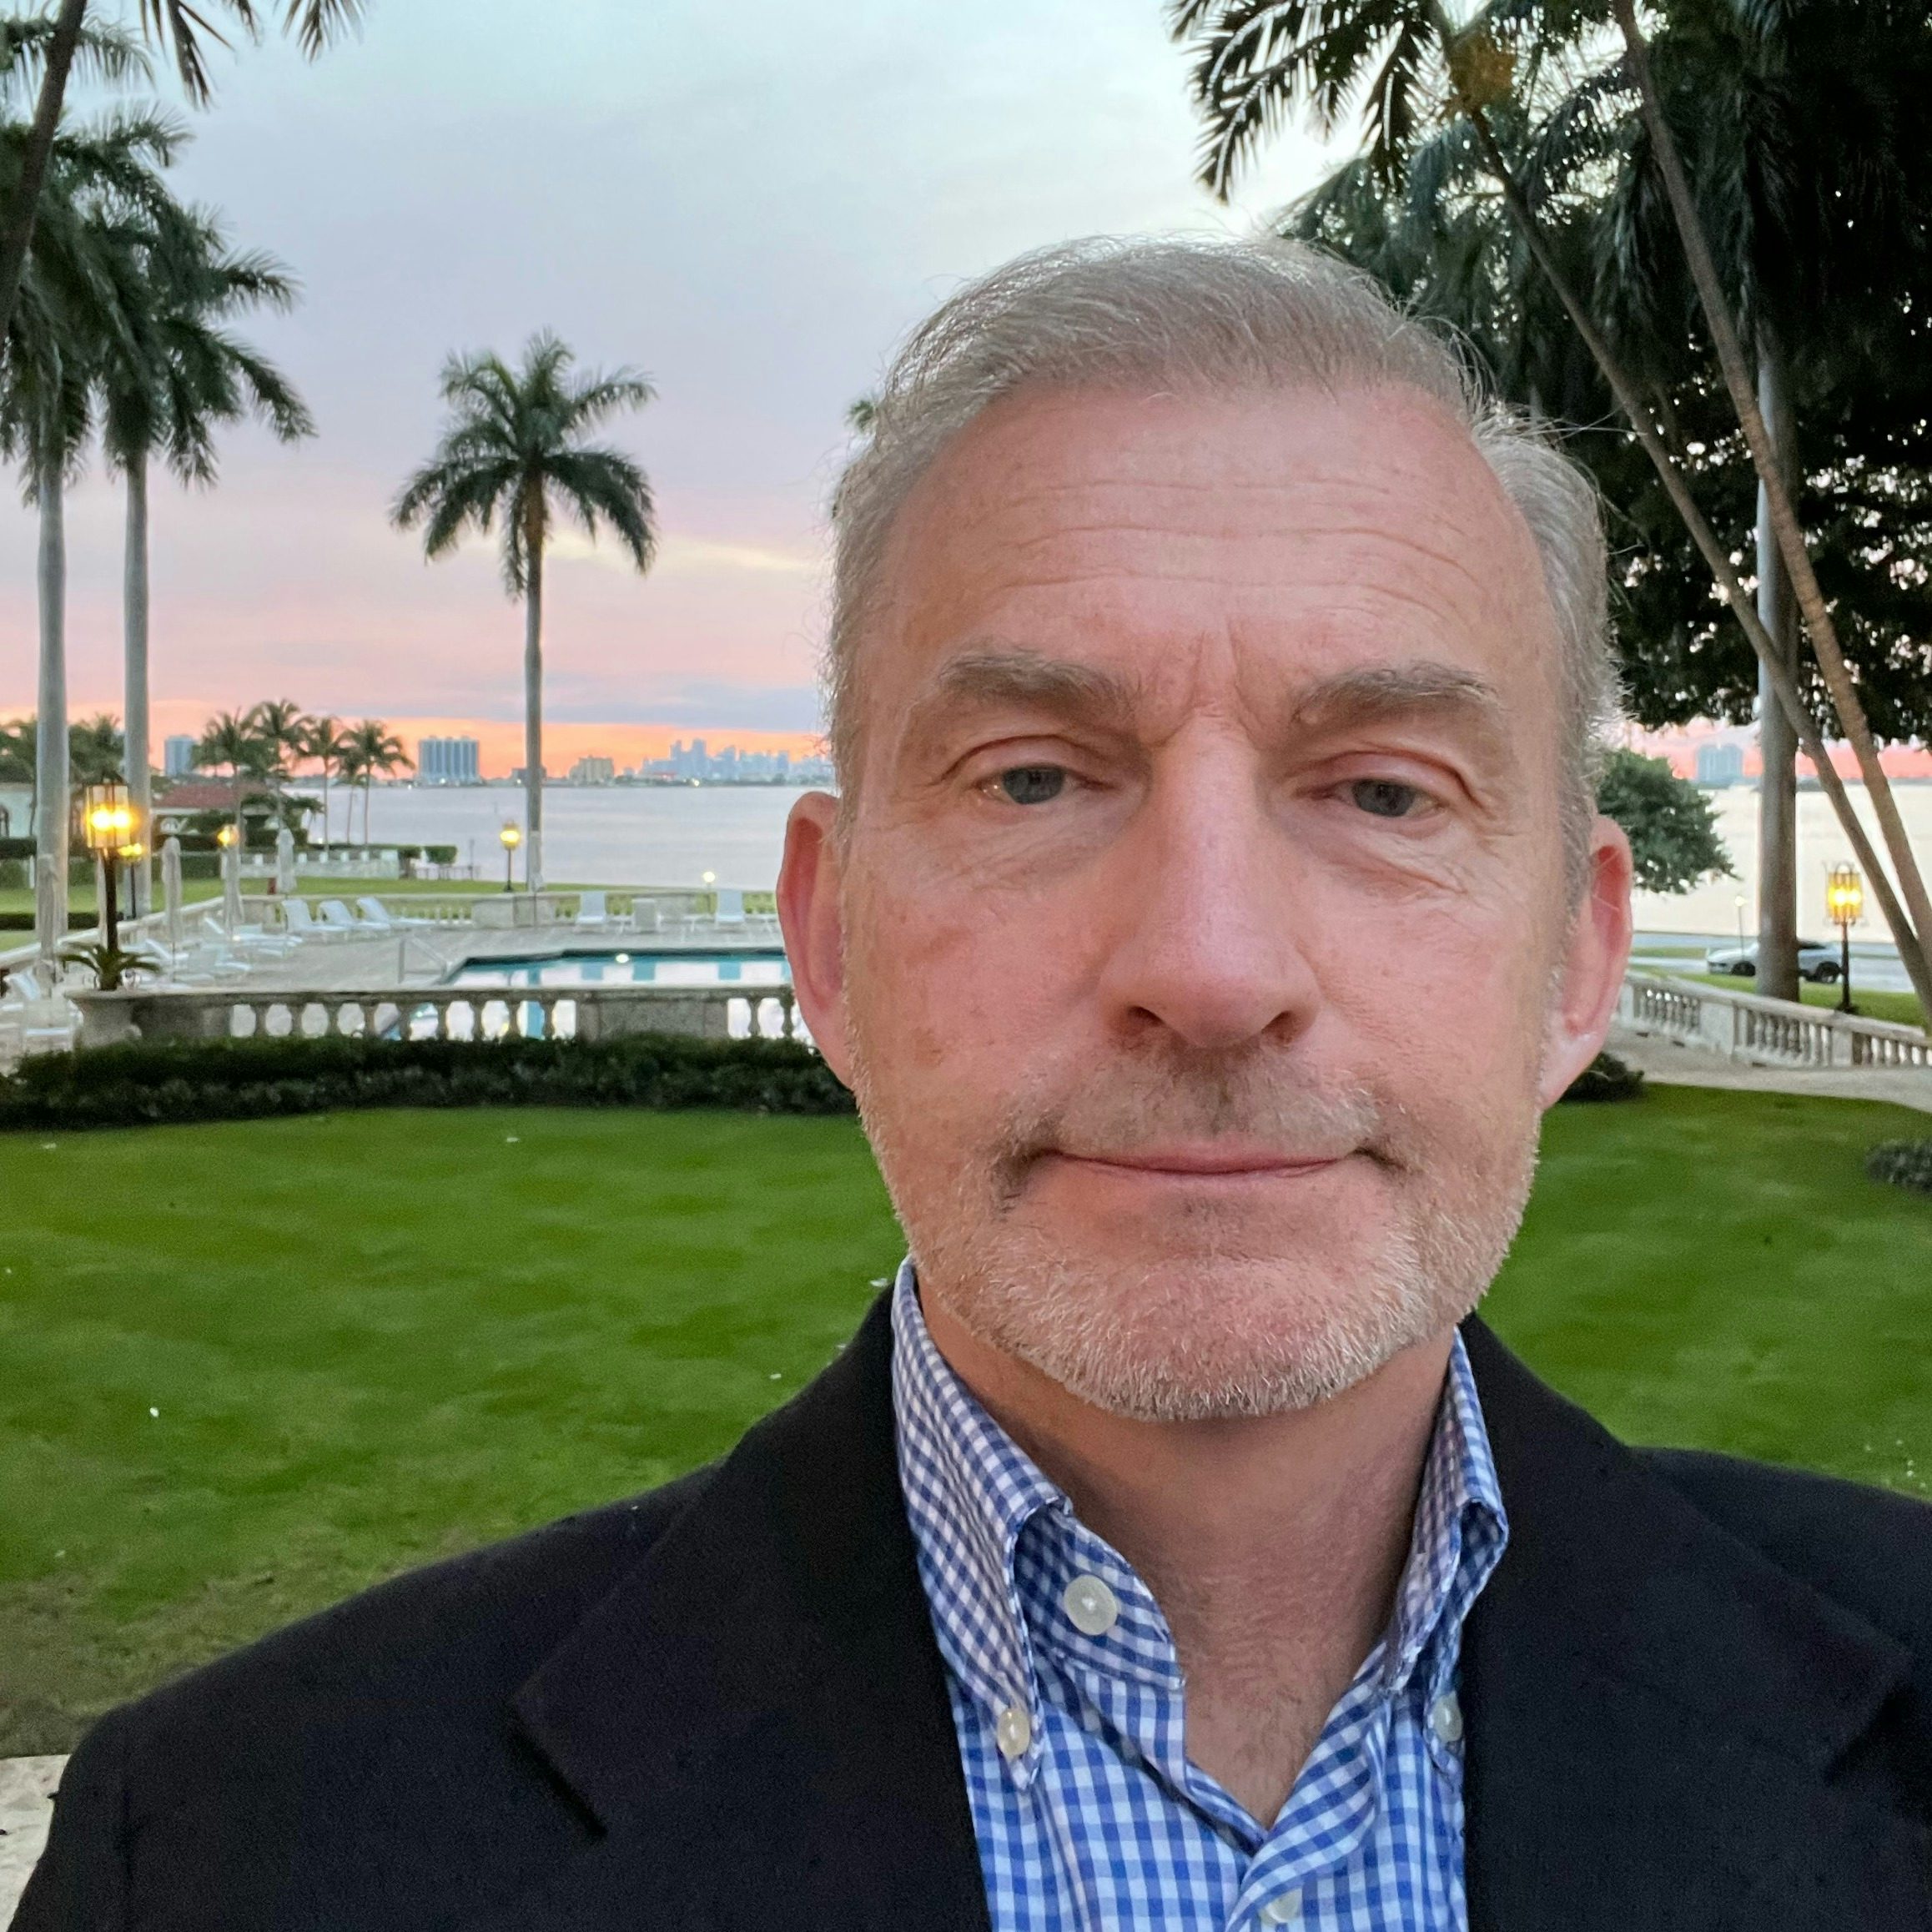 Travel Advisor David Pierce in a suit in front of palm trees at sunset.